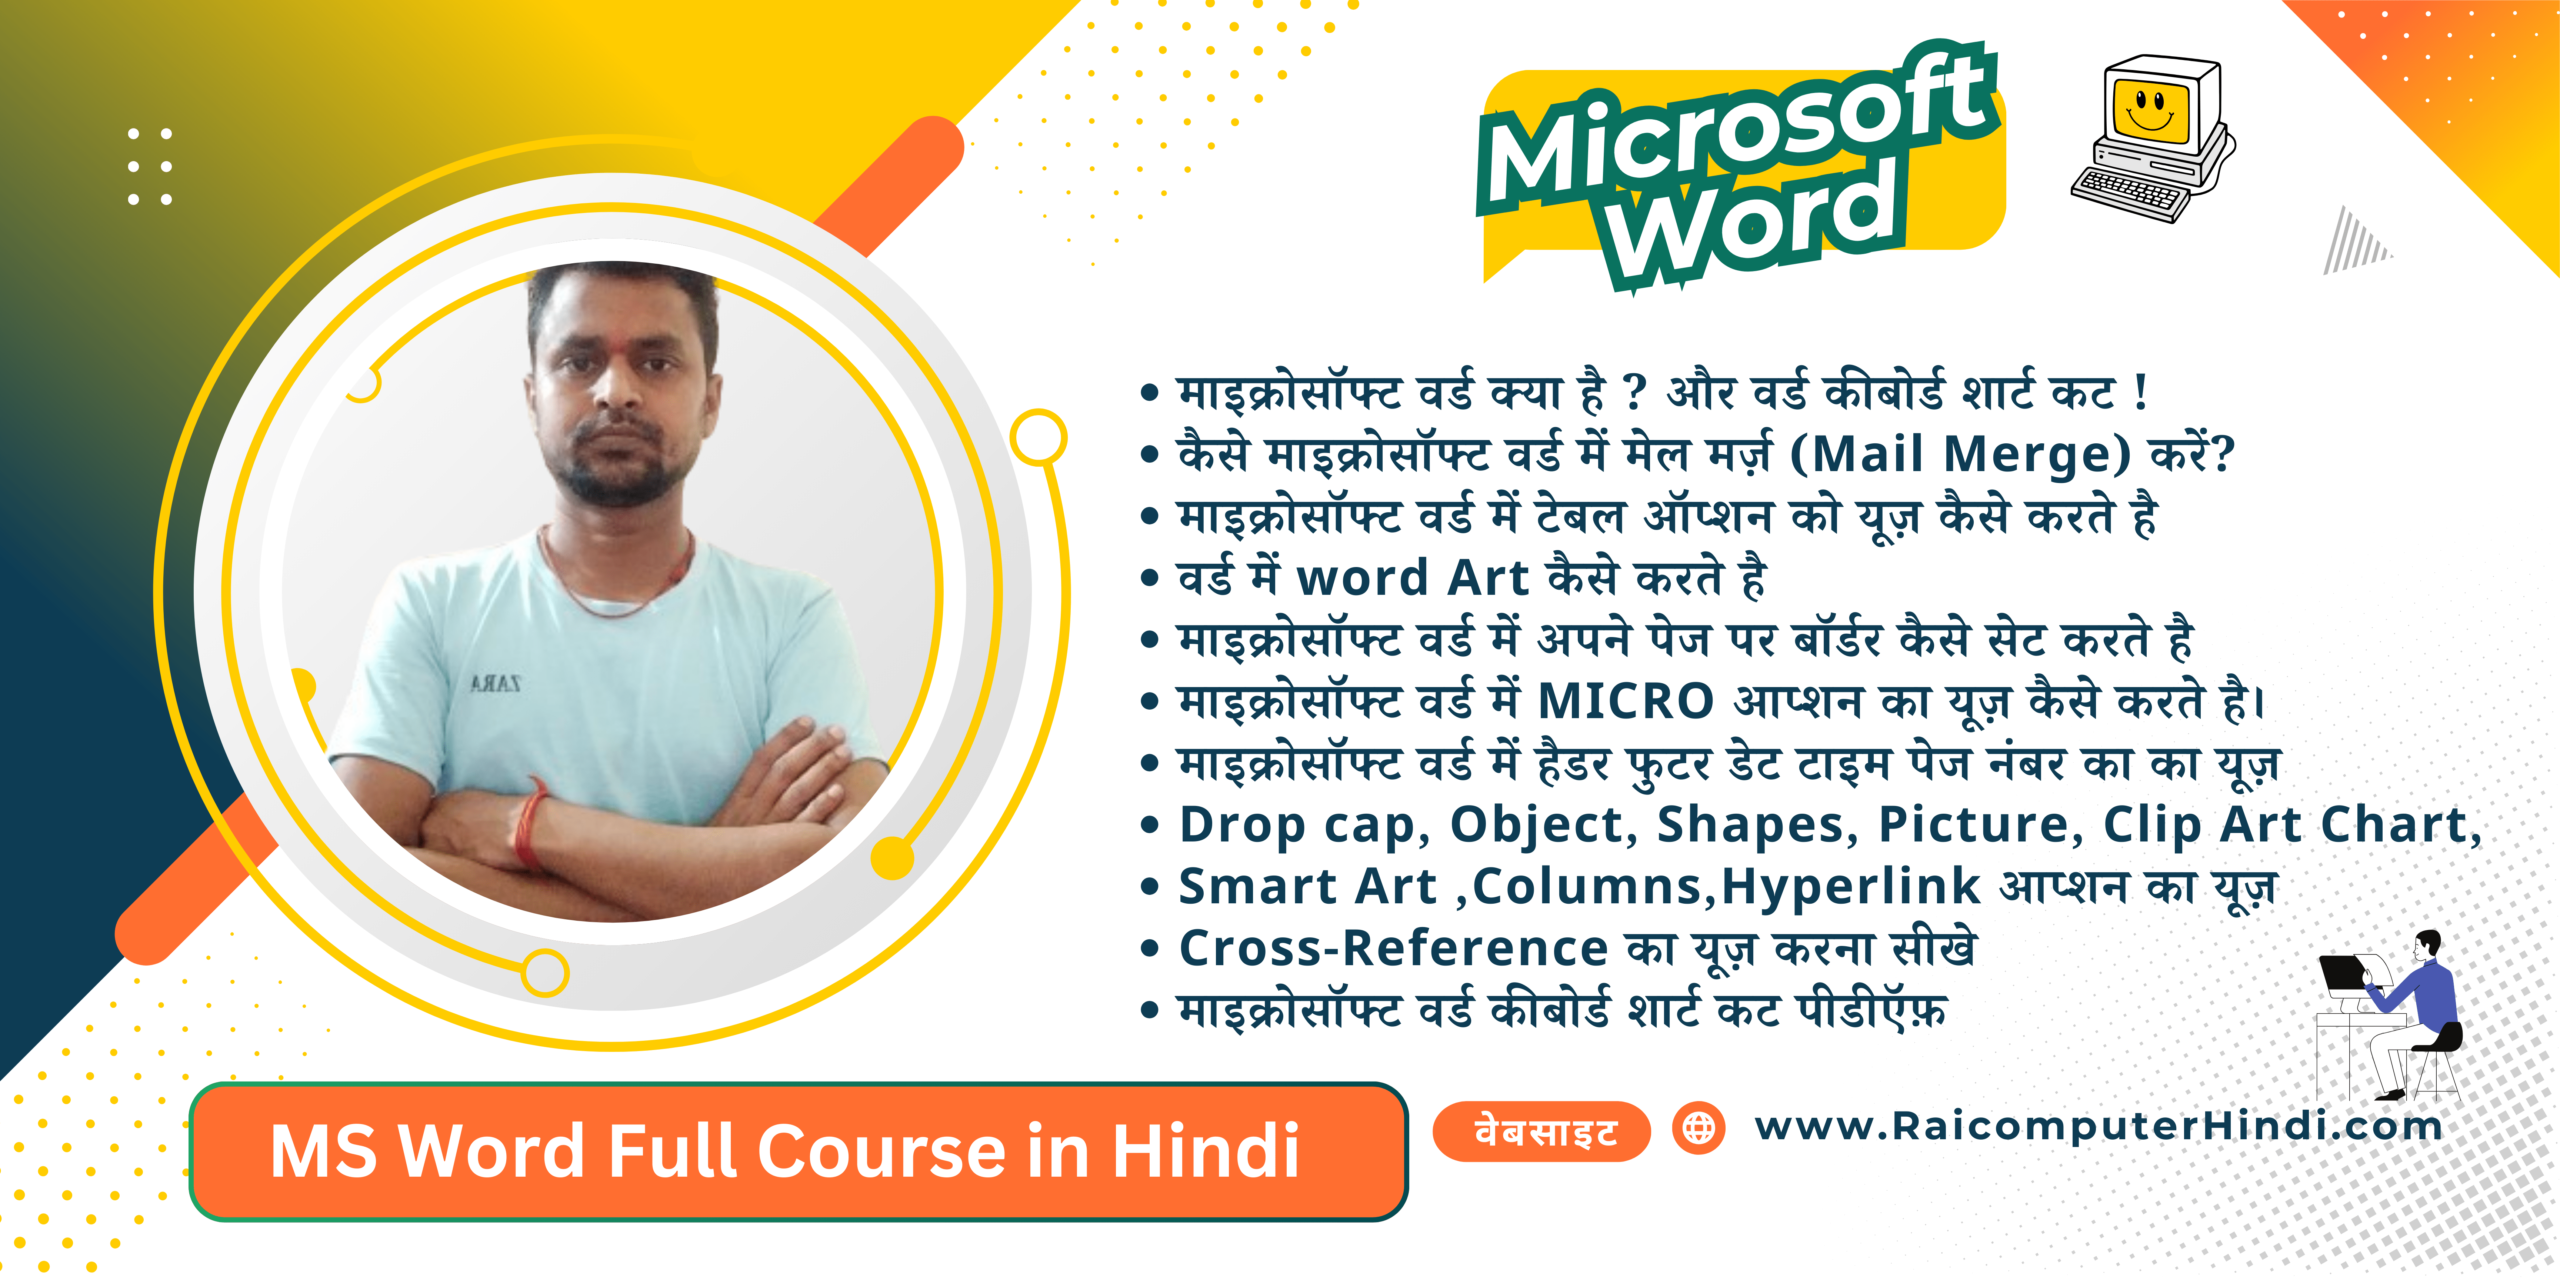 MS Word Full Course in Hindi